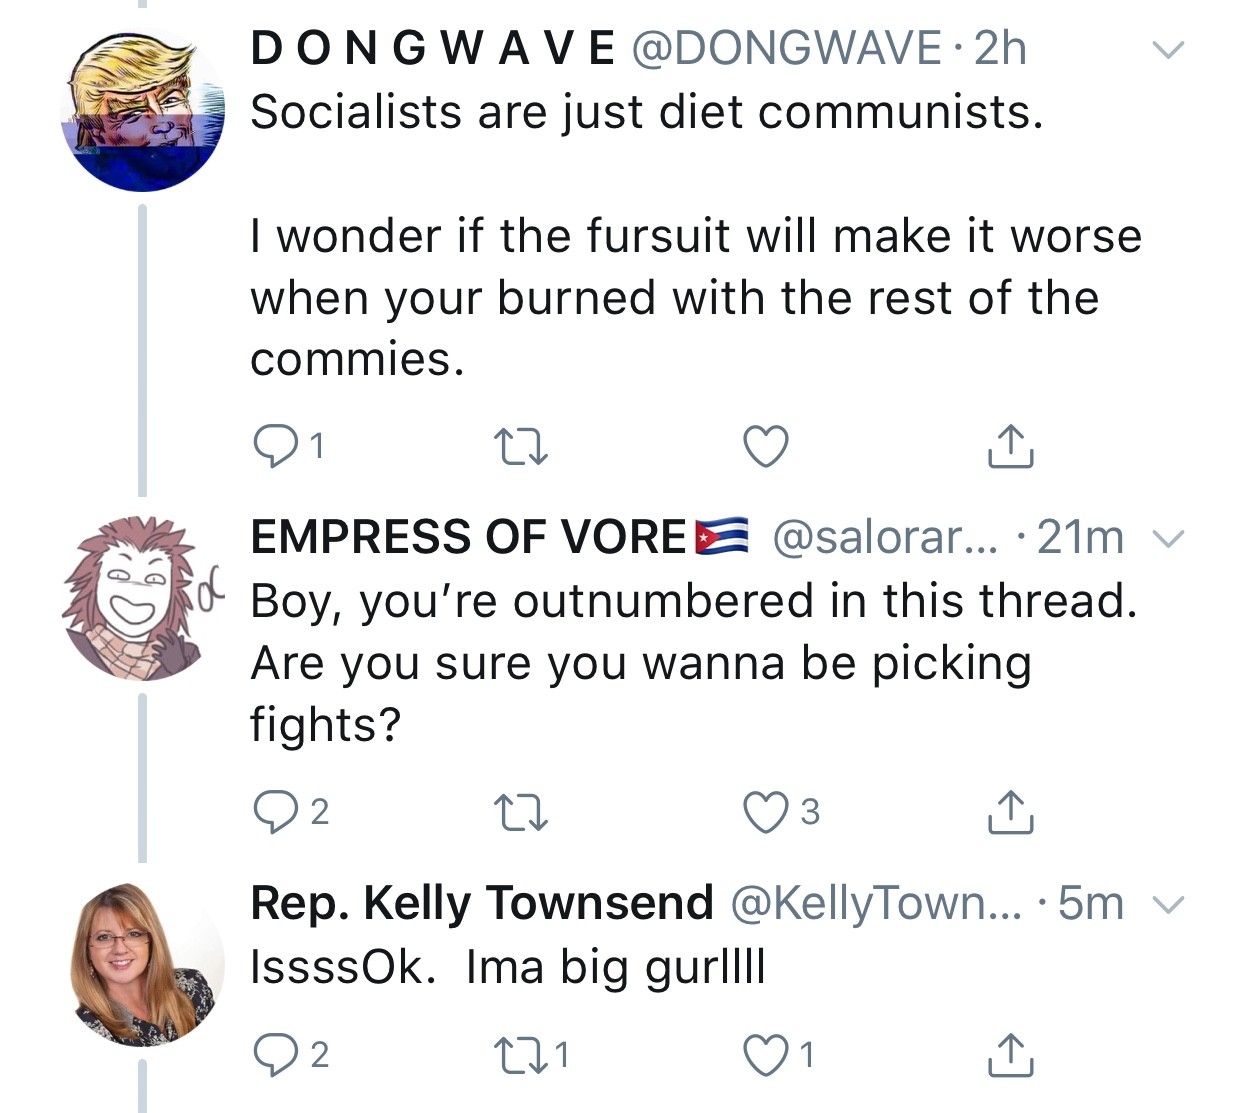 Arizona Furry Porn - Arizona Lawmaker Kelly Townsend Wants To Know What A Furry Is | Phoenix New  Times